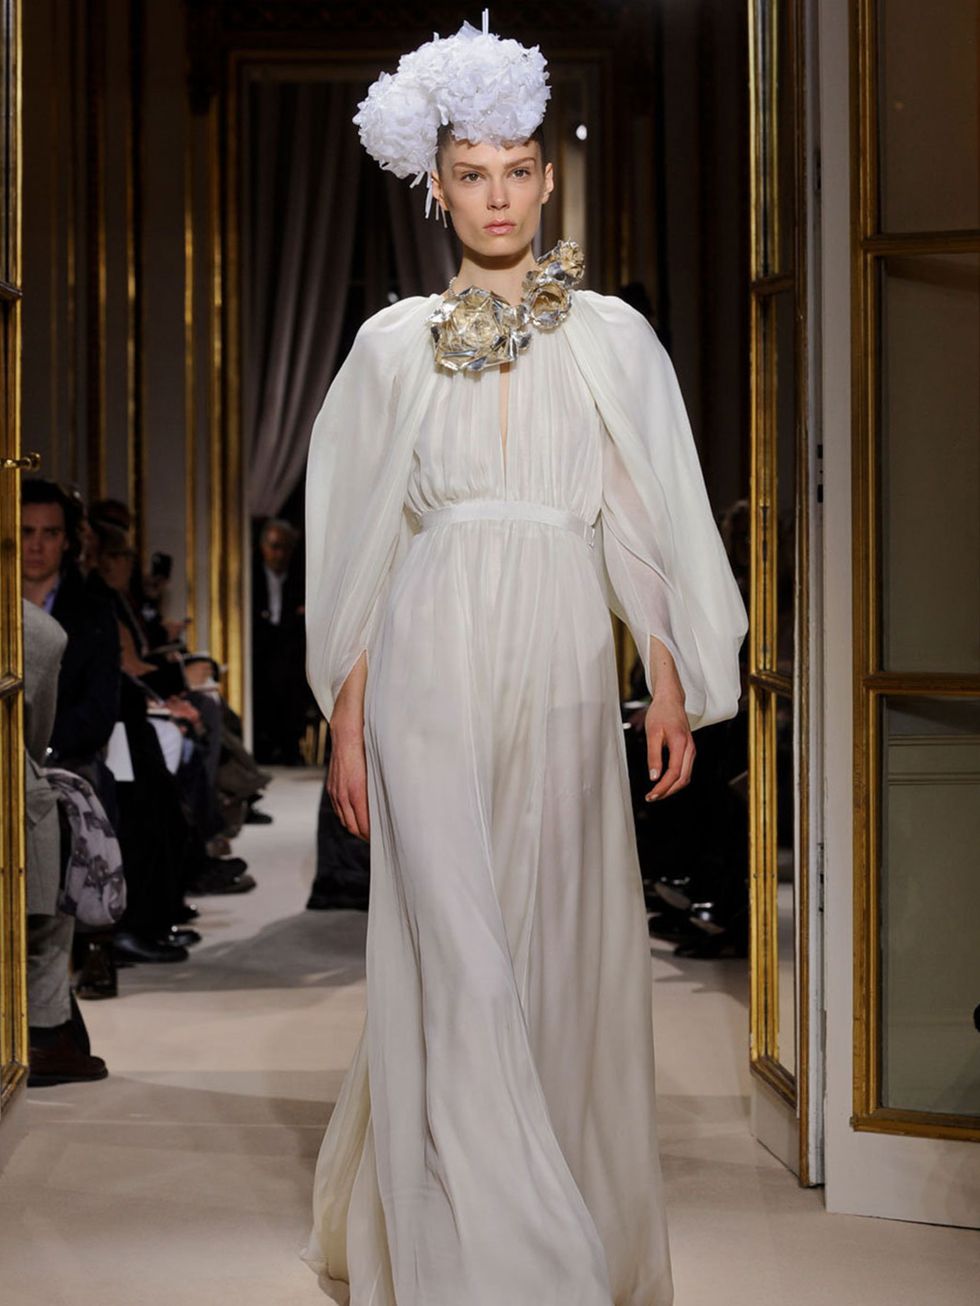 <p>Jessica Biel married in Giambattista Valli dress this weekend - was it one of these? </p>